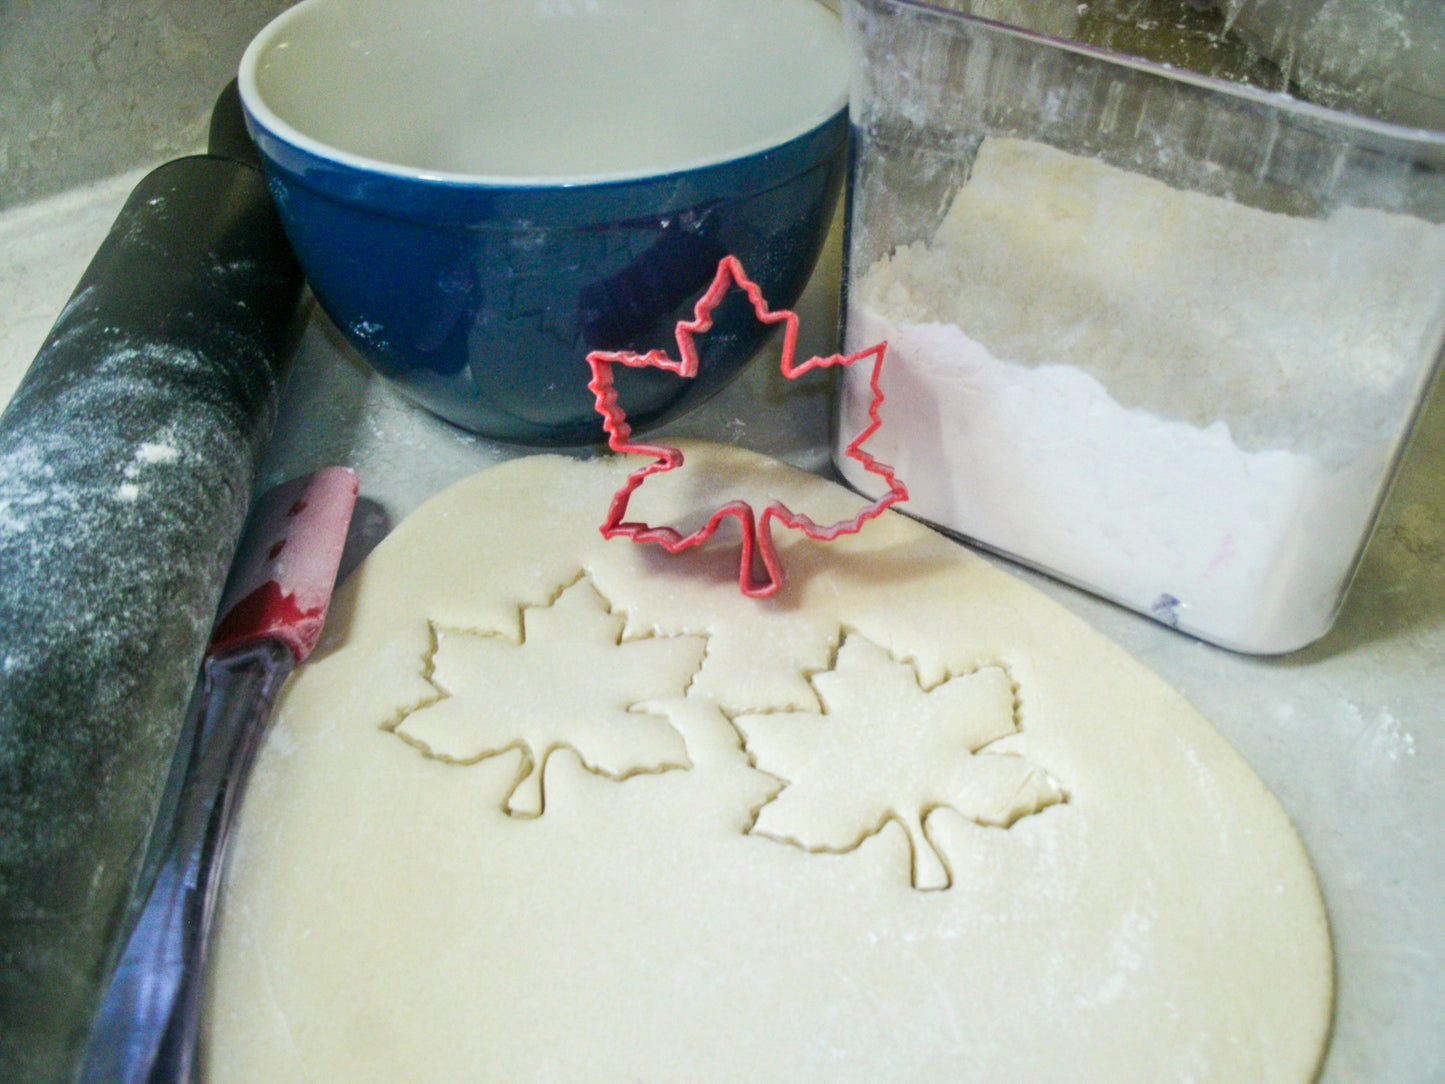 Leaves Tree Leaf Foliage Forest Trees Set Of 5 Cookie Cutters USA PR1526